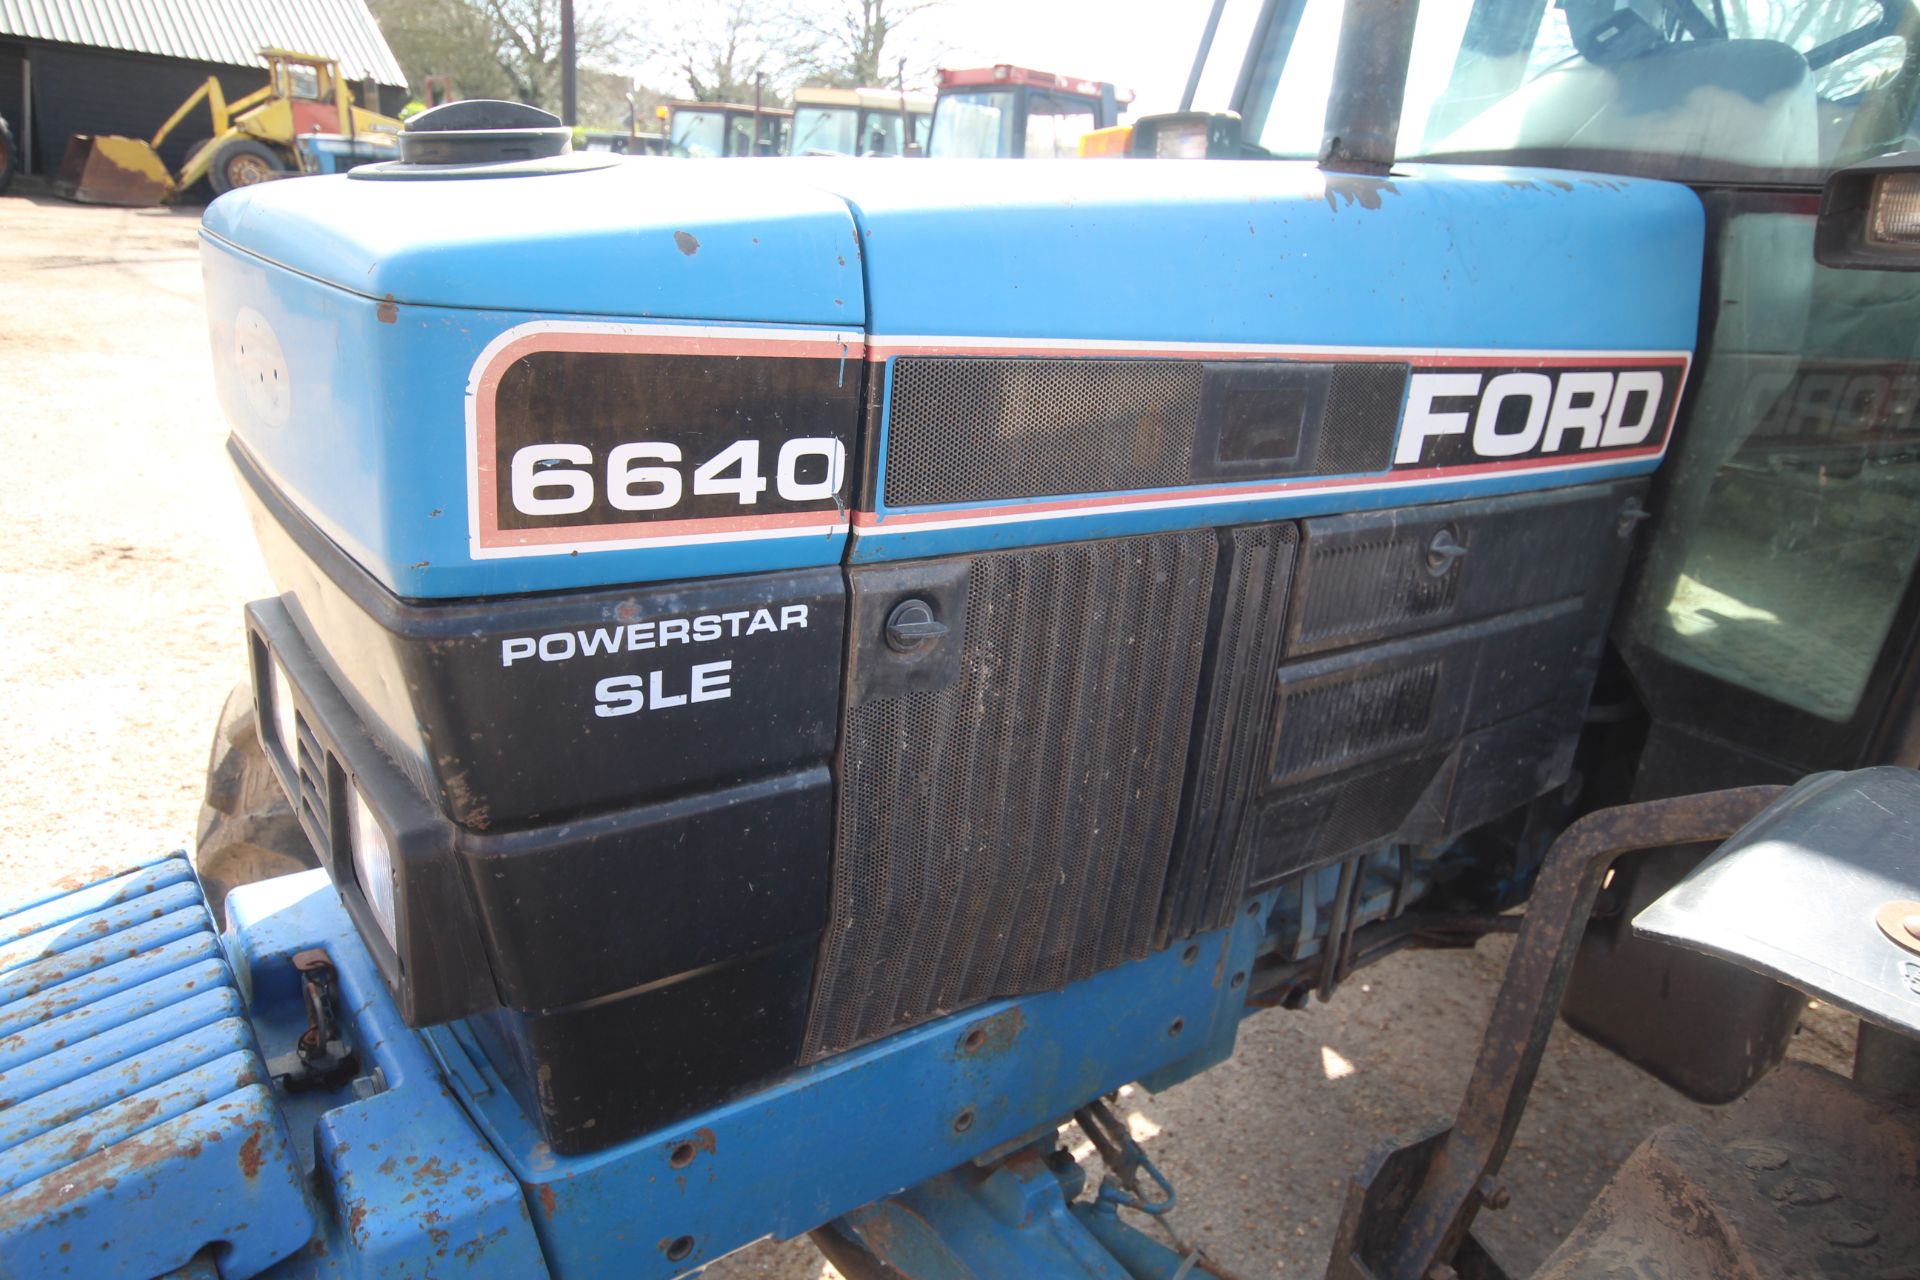 Ford 6640 Powerstar SLE 4WD tractor. Registration M622 WVW. Date of first registration 09/01/1995. - Image 7 of 67